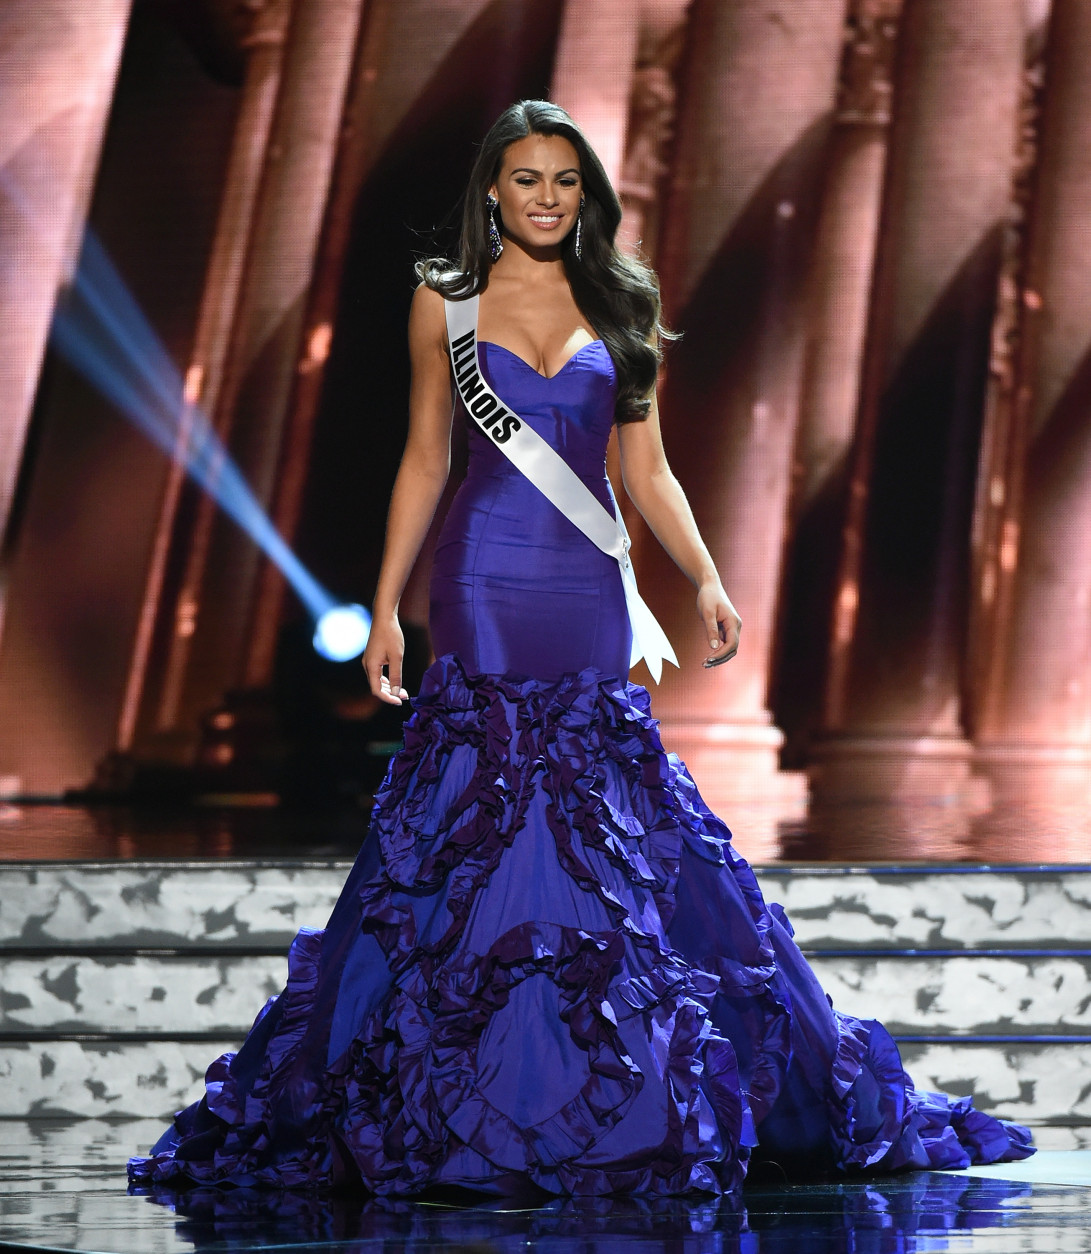 LAS VEGAS, NV - JUNE 01:  Miss Illinois USA Zena Malak competes in the evening gown competition during the 2016 Miss USA pageant preliminary competition at T-Mobile Arena on June 1, 2016 in Las Vegas, Nevada. The 2016 Miss USA will be crowned on June 5 in Las Vegas.  (Photo by Ethan Miller/Getty Images)